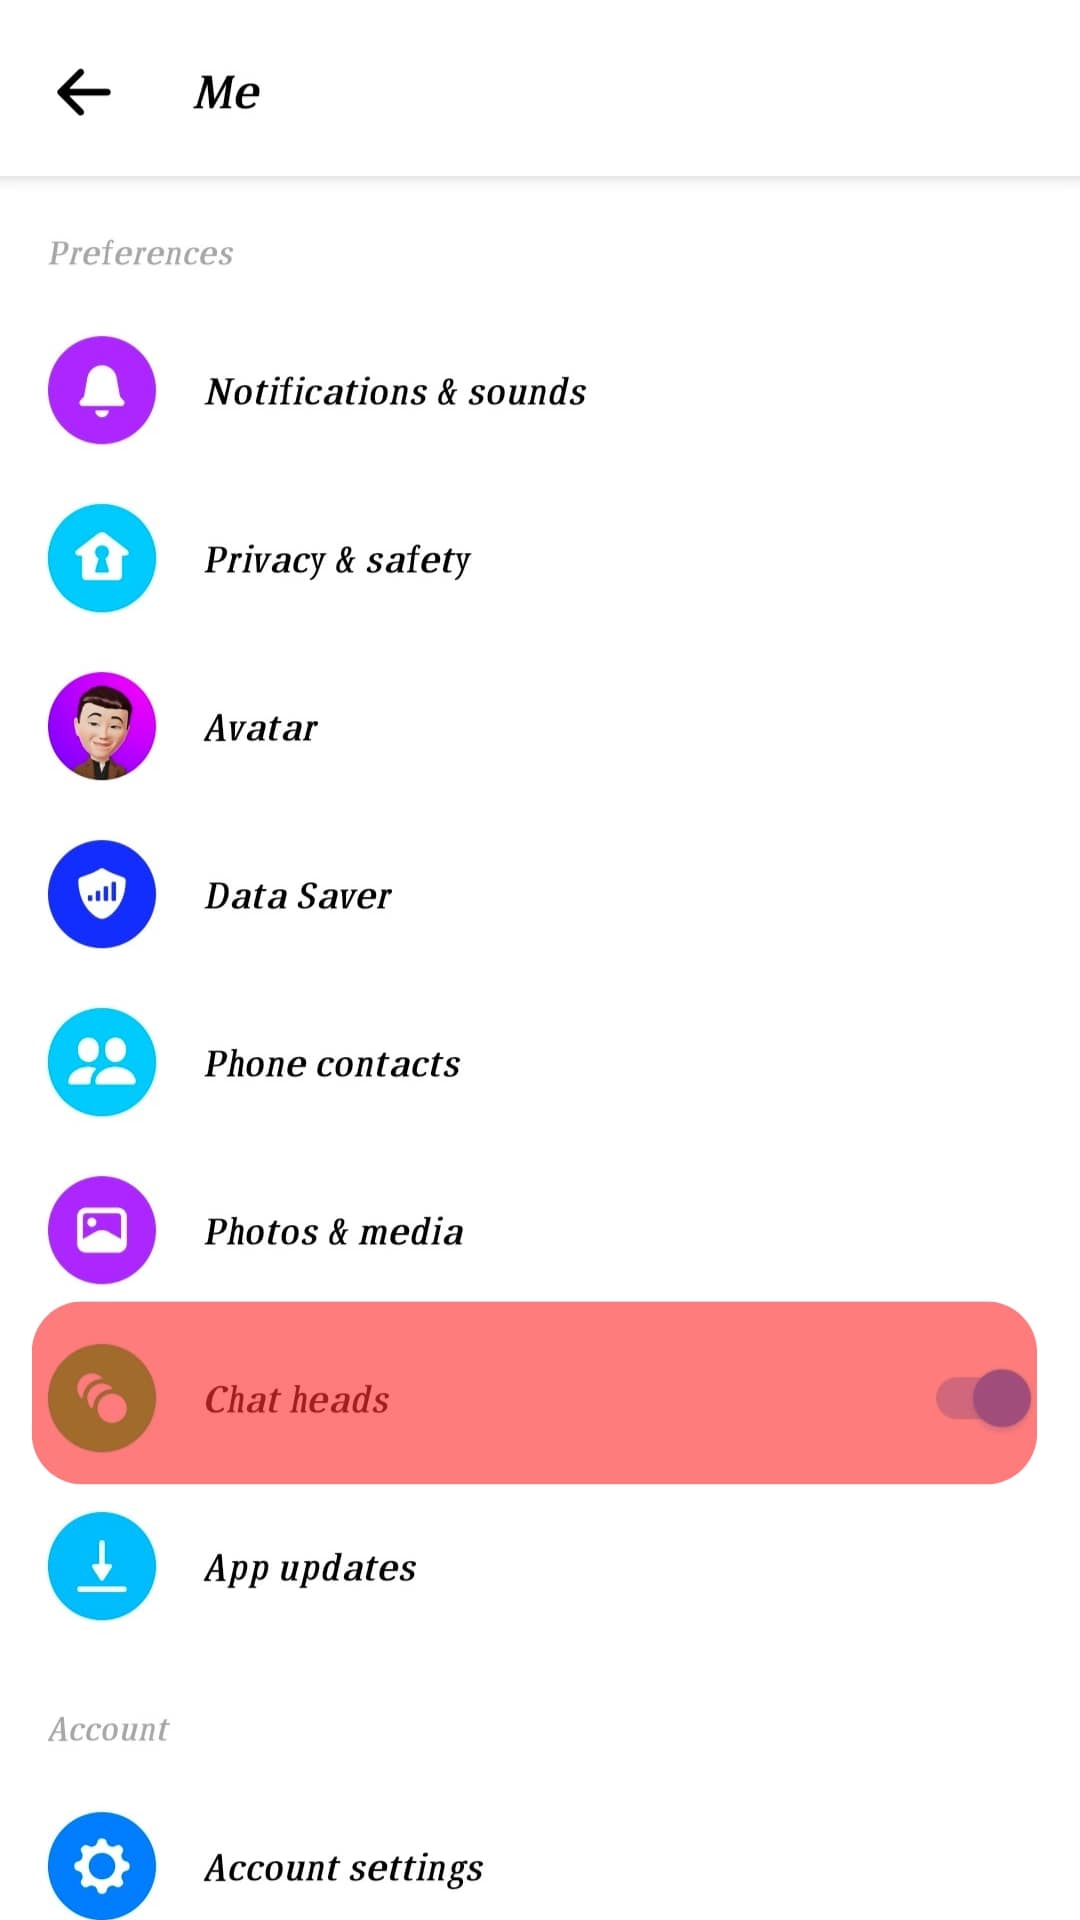 Turn Off The Chat Heads Option To Disable Facebook Messenger Pop-Ups